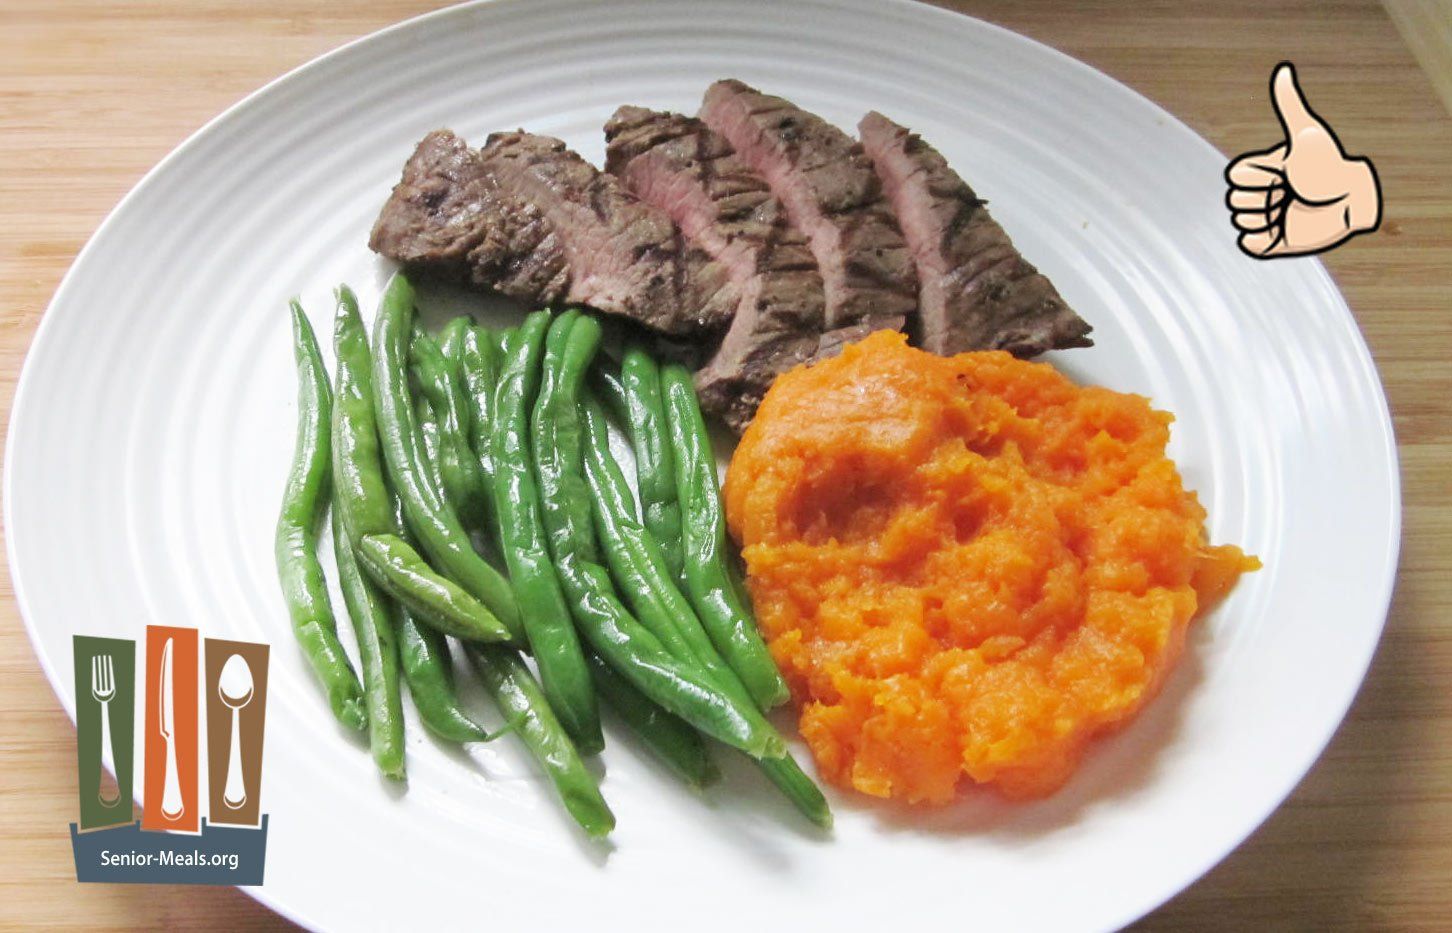 Seared Steak with Mashed Sweets and Sauteed Green Beans